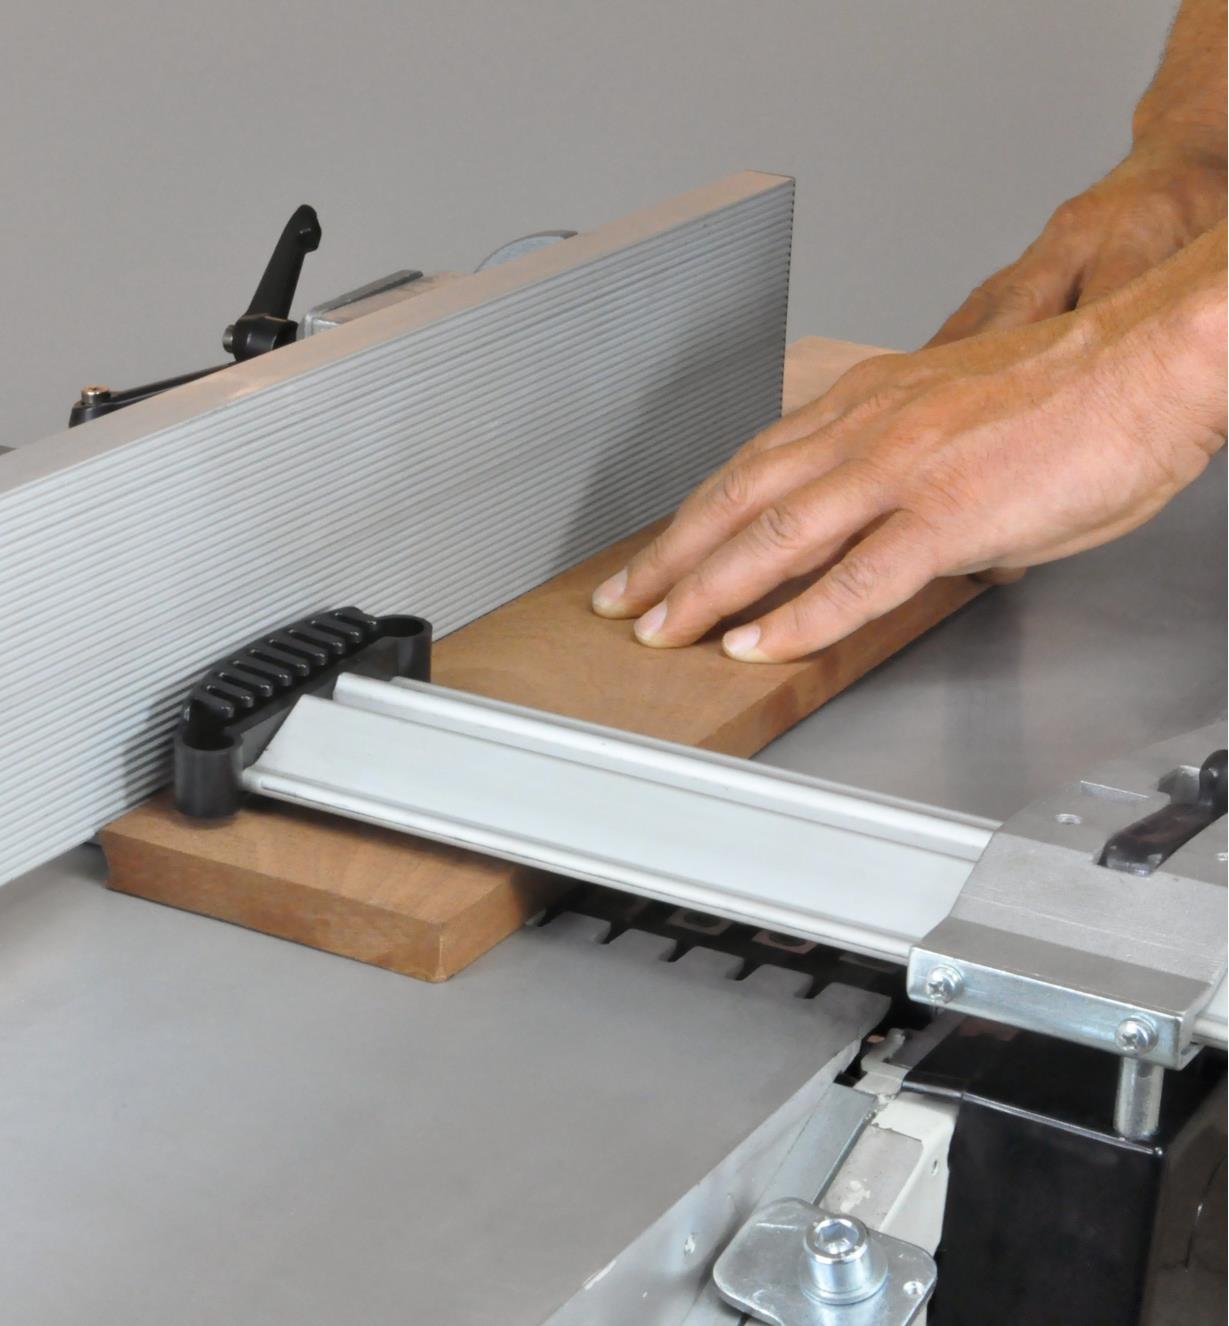 The blade guard on the Rikon 10" helical planer/jointer helping to protect the user from injury